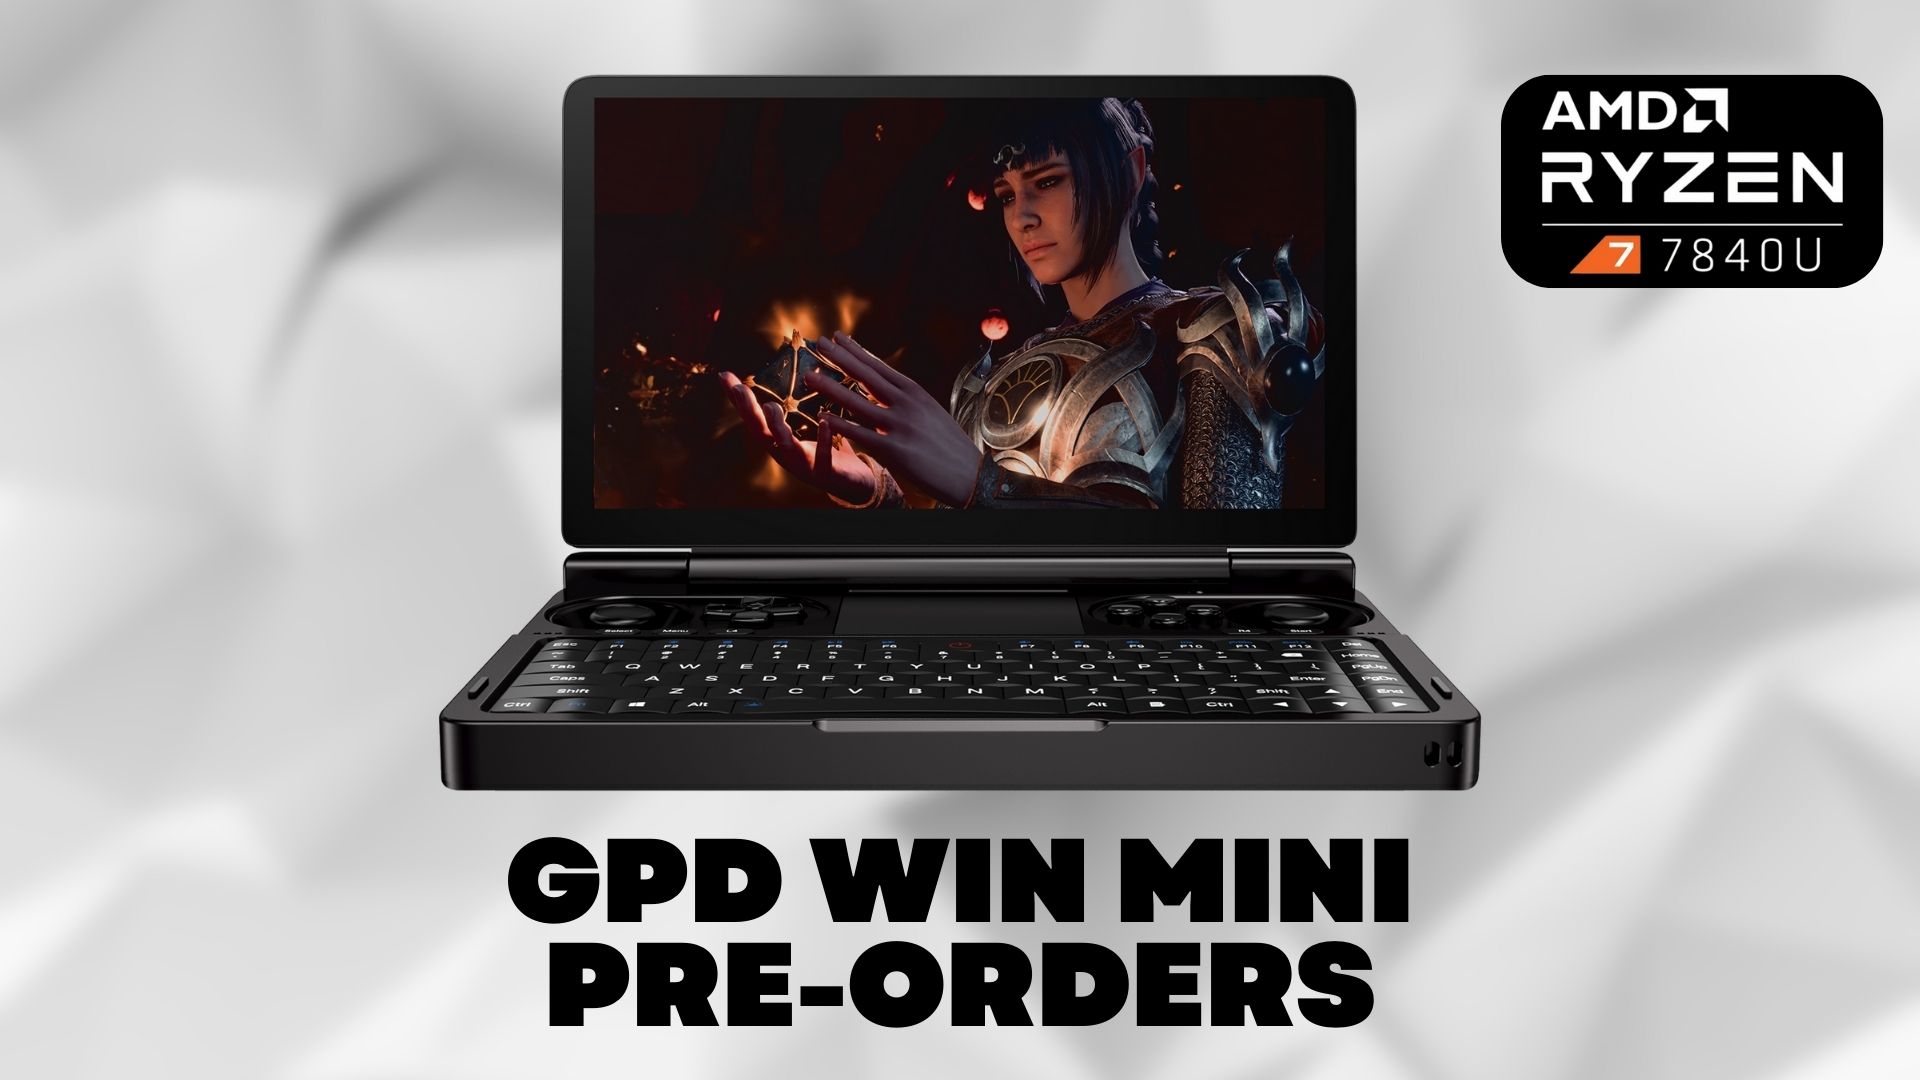 GPD WIN Mini pre-orders – Be first to get your 7840U or 7640U clamshell handheld gaming PC